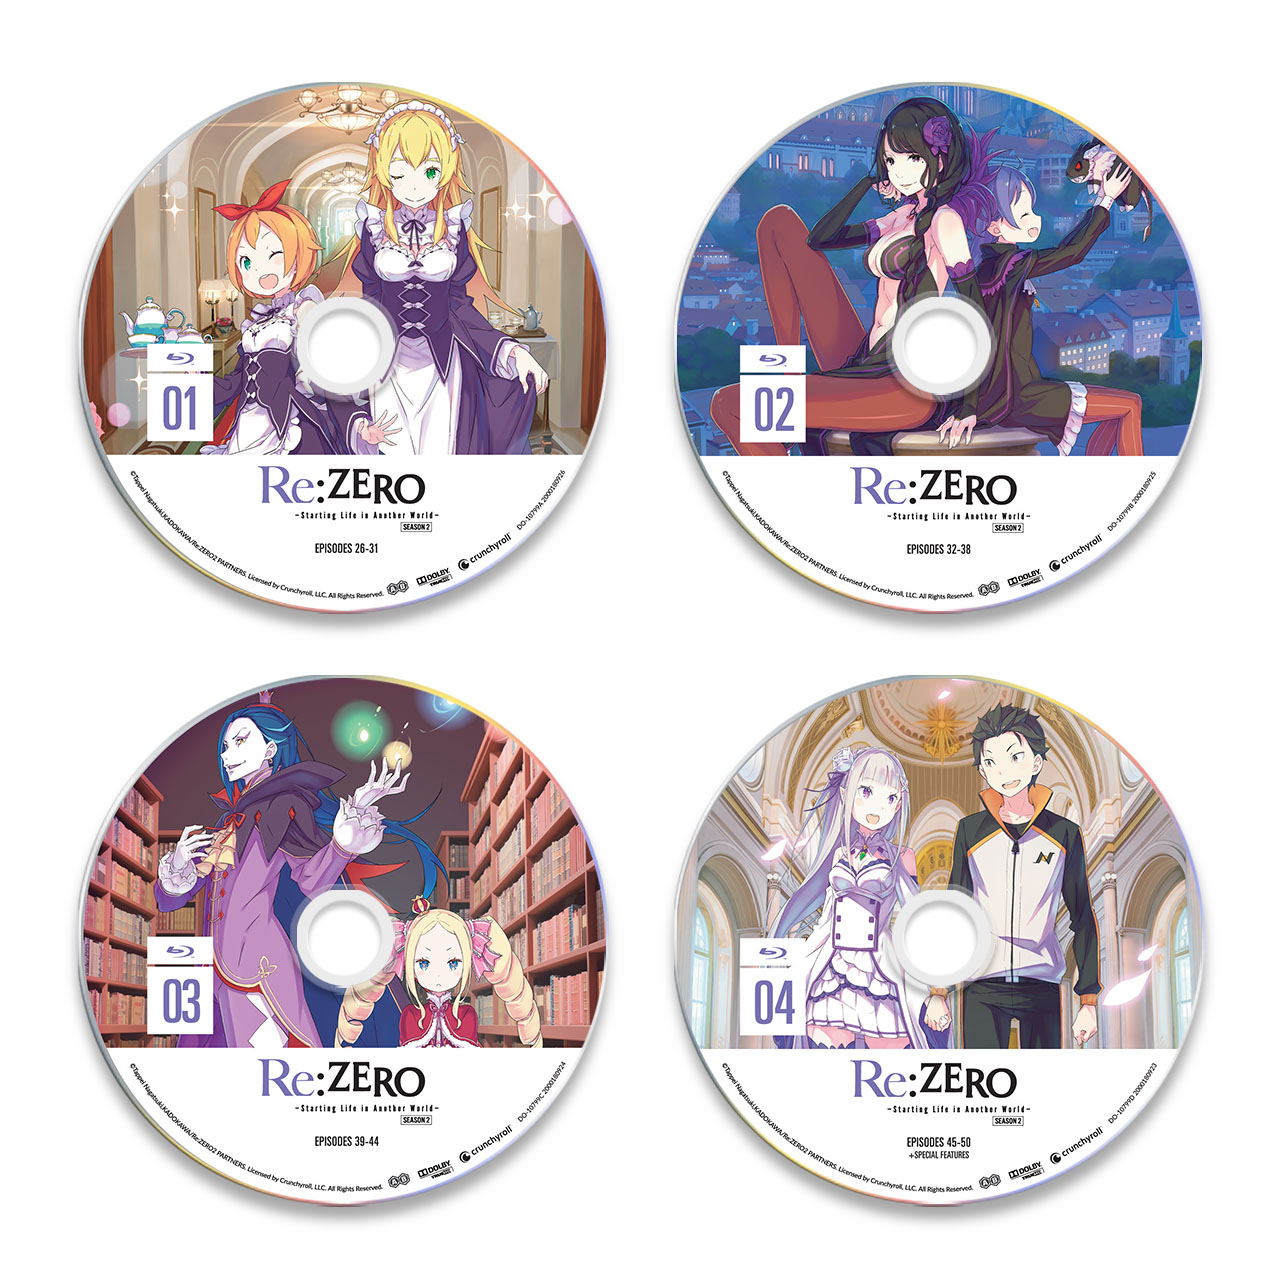 Re:ZERO -Starting Life in Another World- Season 2 - Blu-ray image count 5